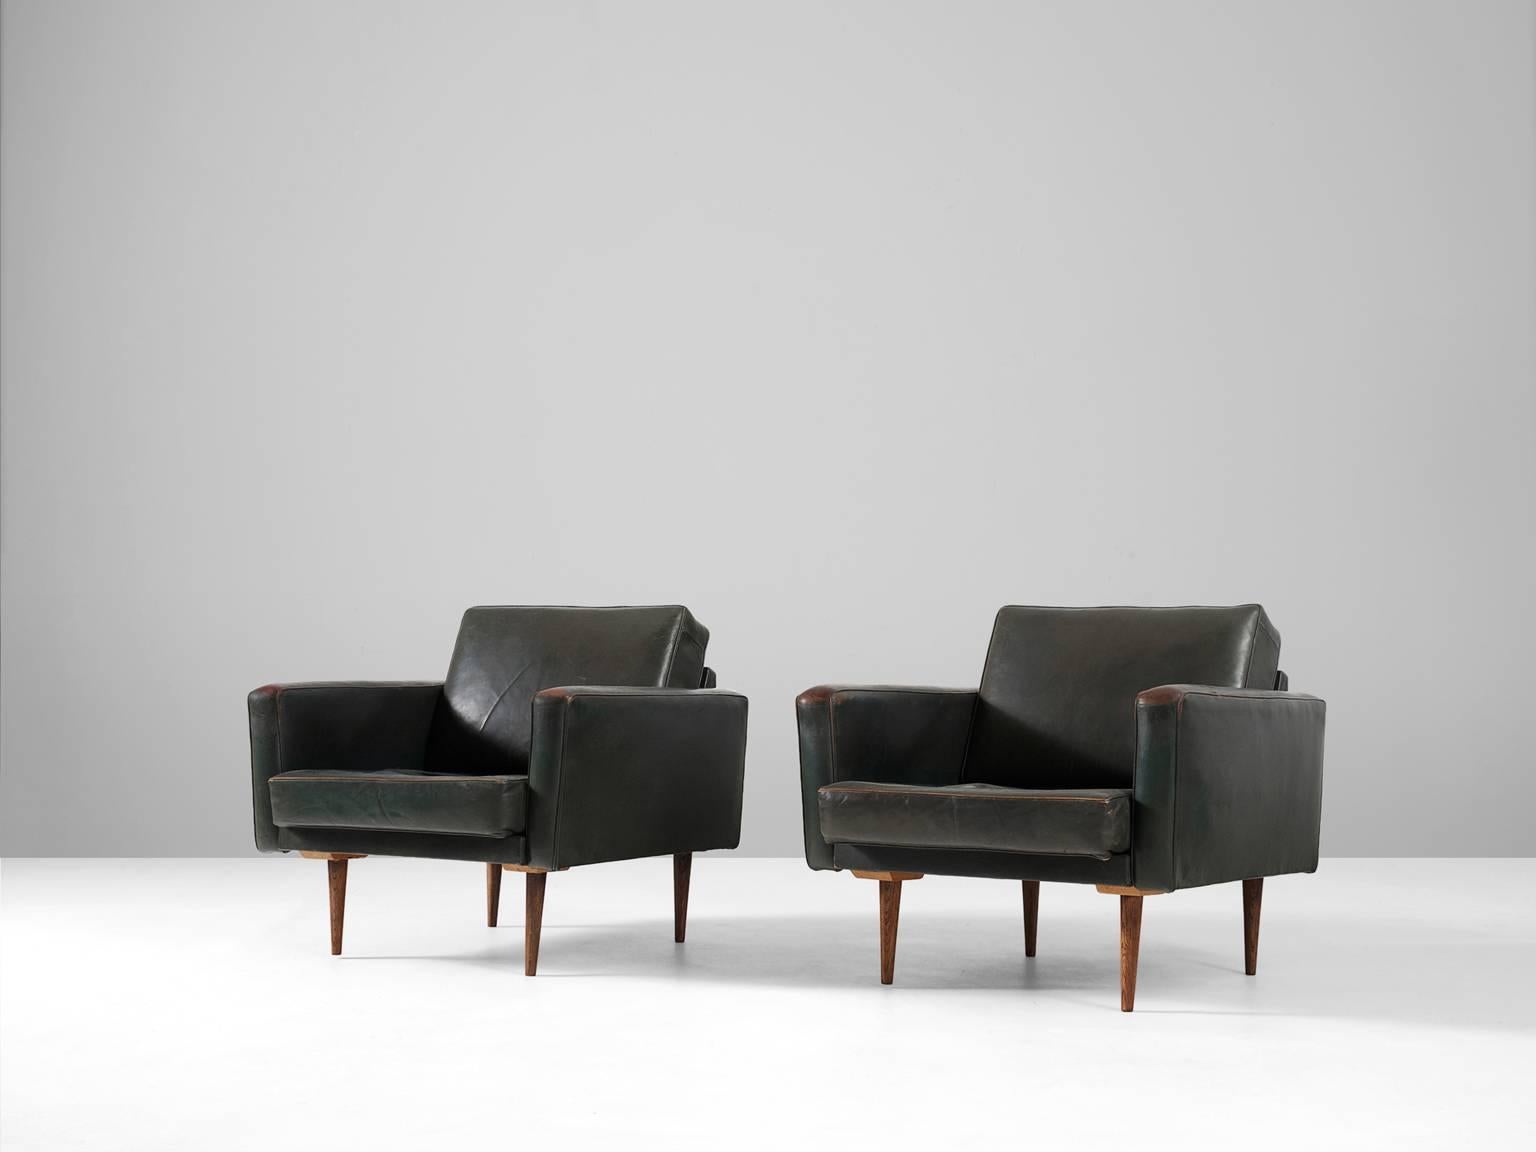 Armchairs, in leather and rosewood, Italy 1960s.

Pair of lounge chairs in dark green leather. The leather upholstery of these easy chairs shows a beautiful patina, which gives these chair a vibrant appearance. 
Due the tapered wooden legs, these